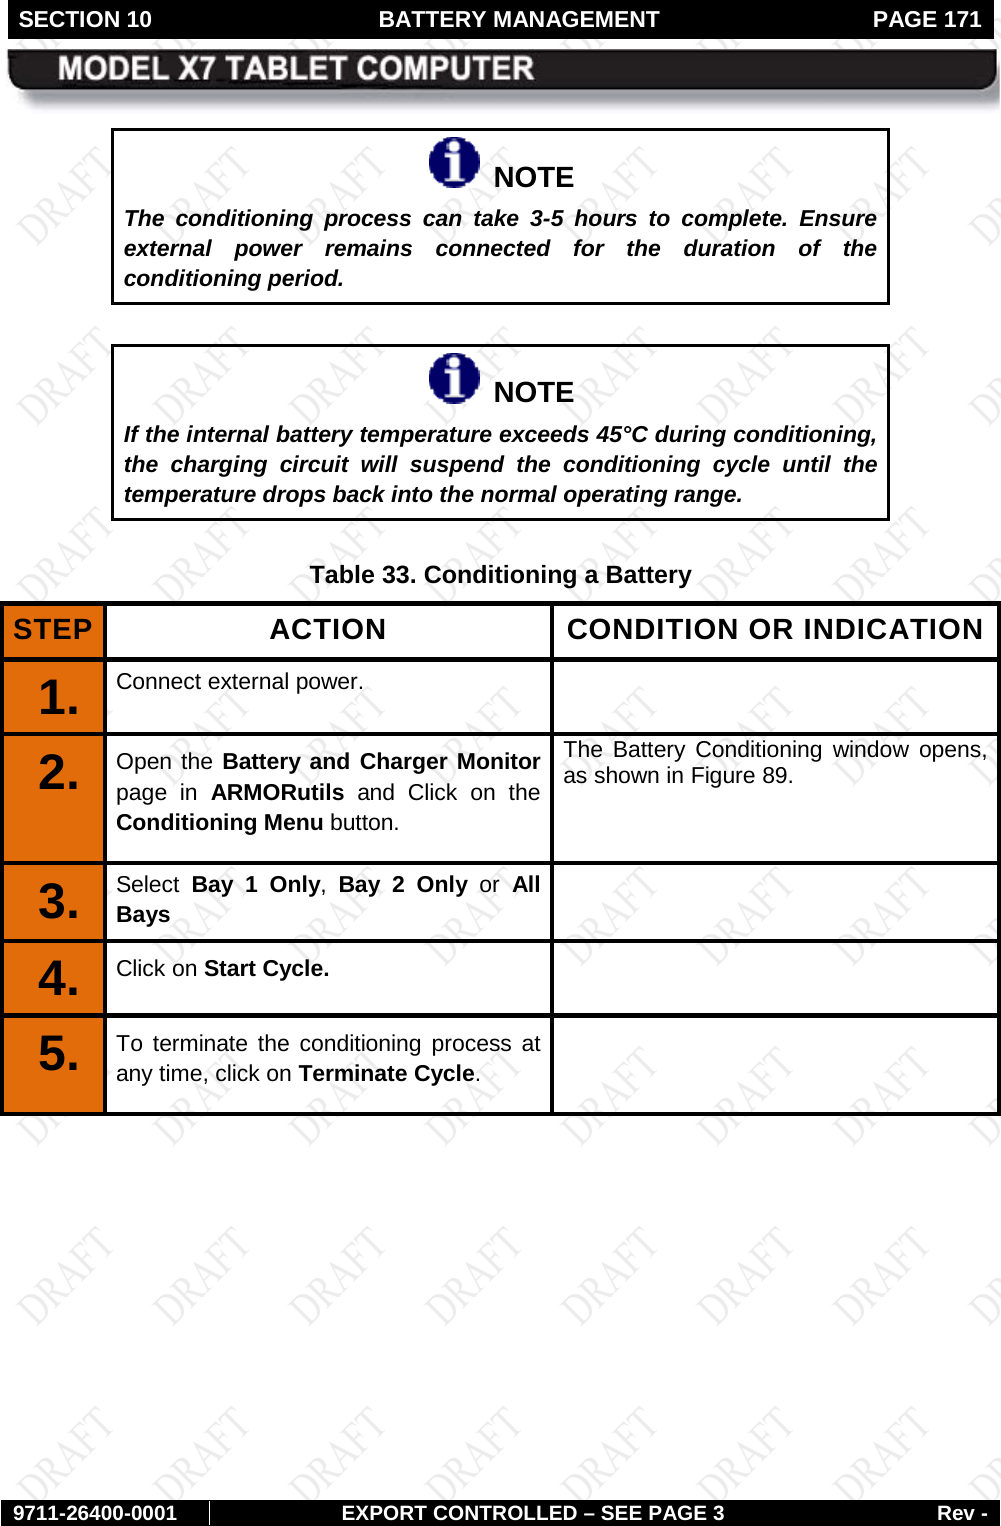 SECTION 10 BATTERY MANAGEMENT  PAGE 171        9711-26400-0001 EXPORT CONTROLLED – SEE PAGE 3 Rev -   NOTE The conditioning process can take 3-5 hours to complete. Ensure external power remains connected for the duration of the conditioning period.     NOTE If the internal battery temperature exceeds 45°C during conditioning, the charging circuit will suspend the conditioning cycle until the temperature drops back into the normal operating range.   Table 33. Conditioning a Battery STEP ACTION CONDITION OR INDICATION 1.  Connect external power.   2.  Open the Battery and Charger Monitor page in ARMORutils and Click on the Conditioning Menu button. The Battery Conditioning window opens, as shown in Figure 89. 3.  Select  Bay 1 Only,  Bay 2 Only or  All Bays  4.  Click on Start Cycle.   5.  To terminate the conditioning process at any time, click on Terminate Cycle.   